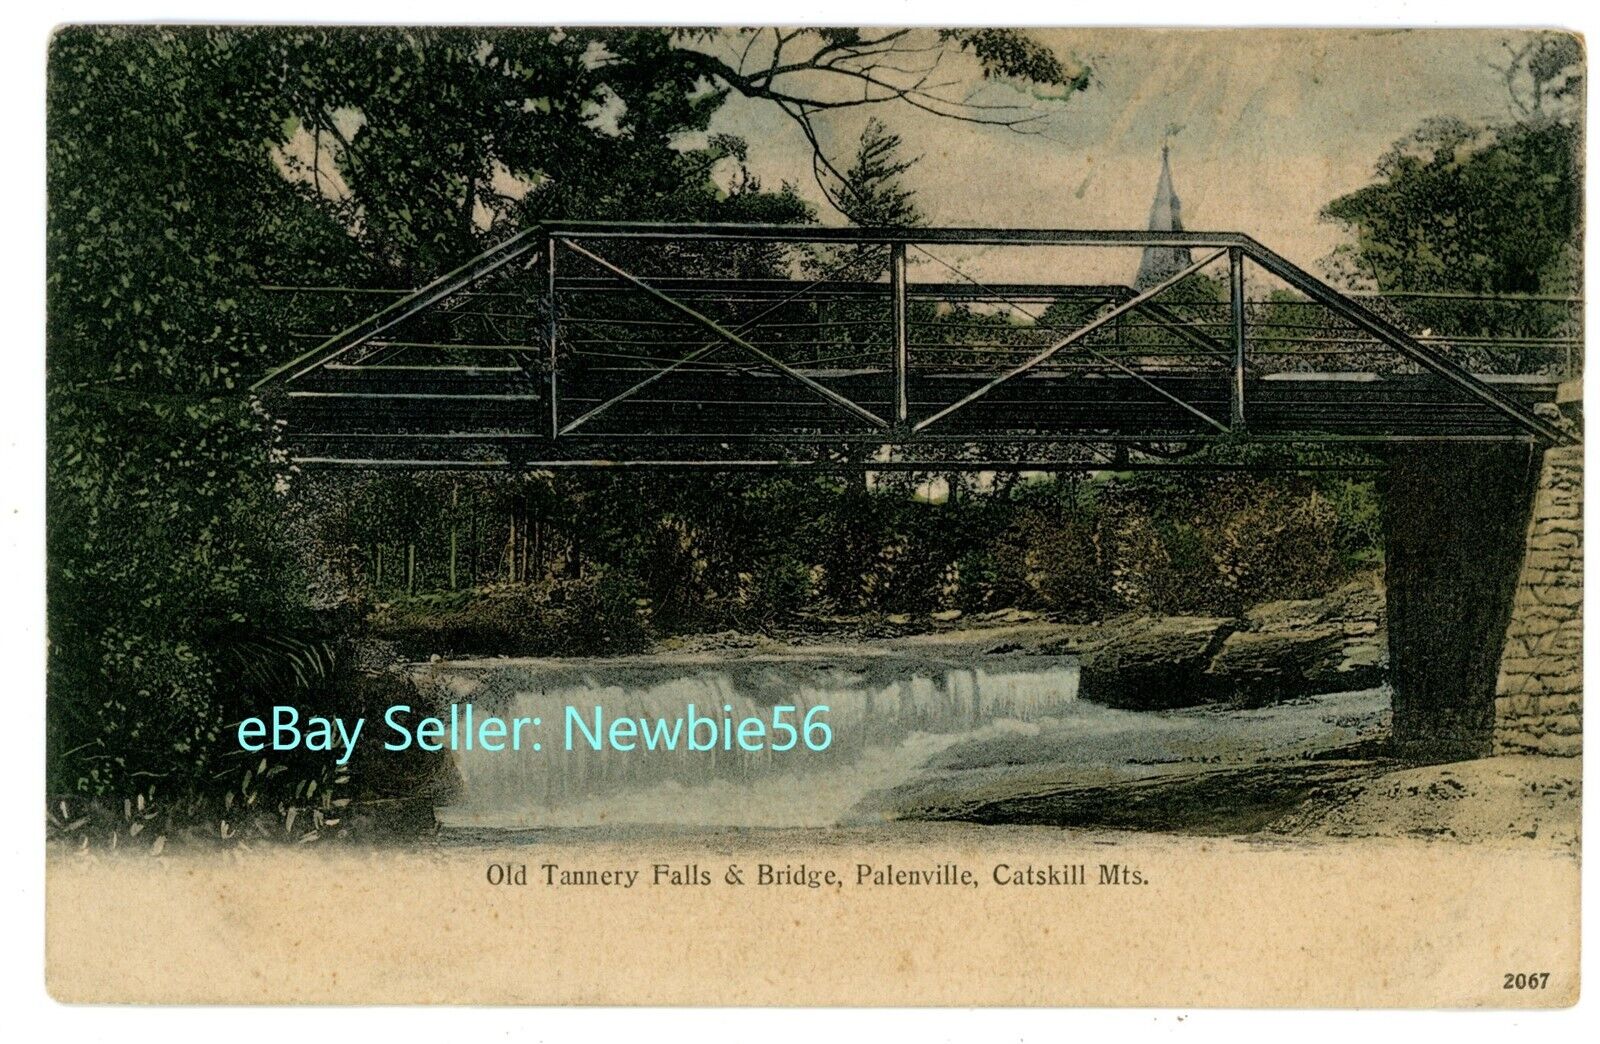 Palenville NY - OLD TANNERY FALLS & BRIDGE - Hand Colored Postcard Catskills